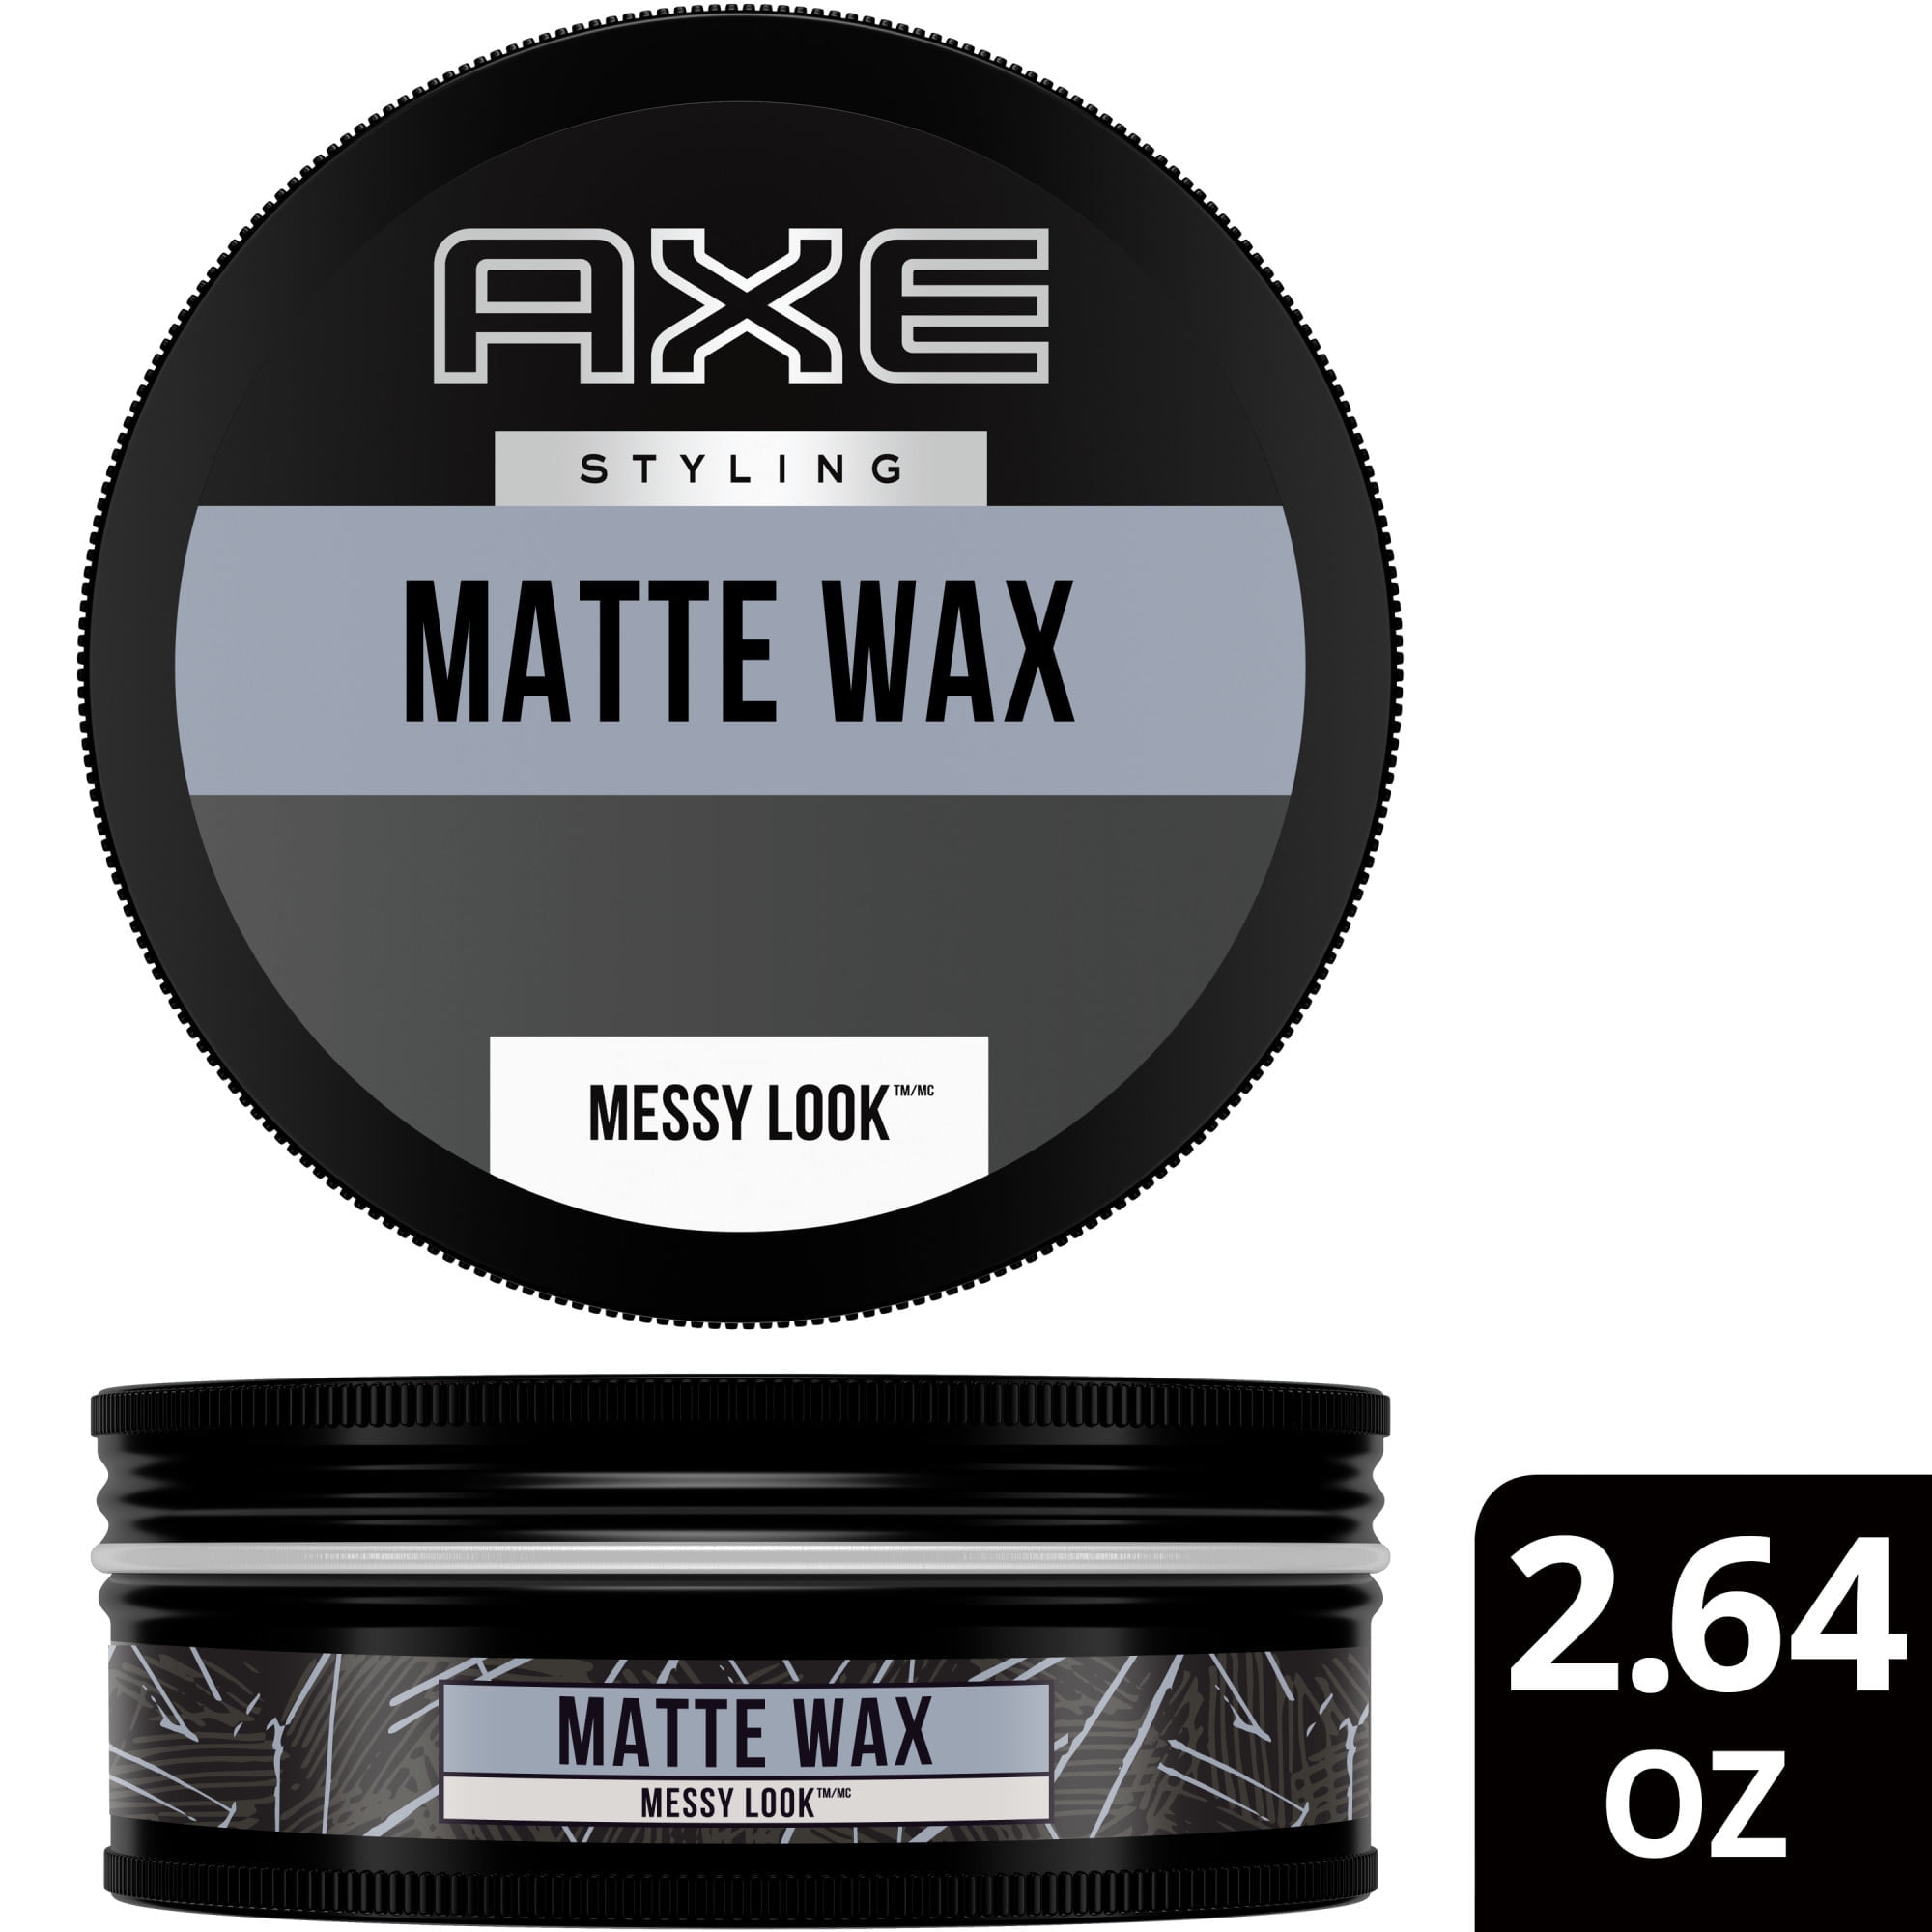 Axe Styling Messy Look Matte Wax Hair Pomade, 2.64 oz